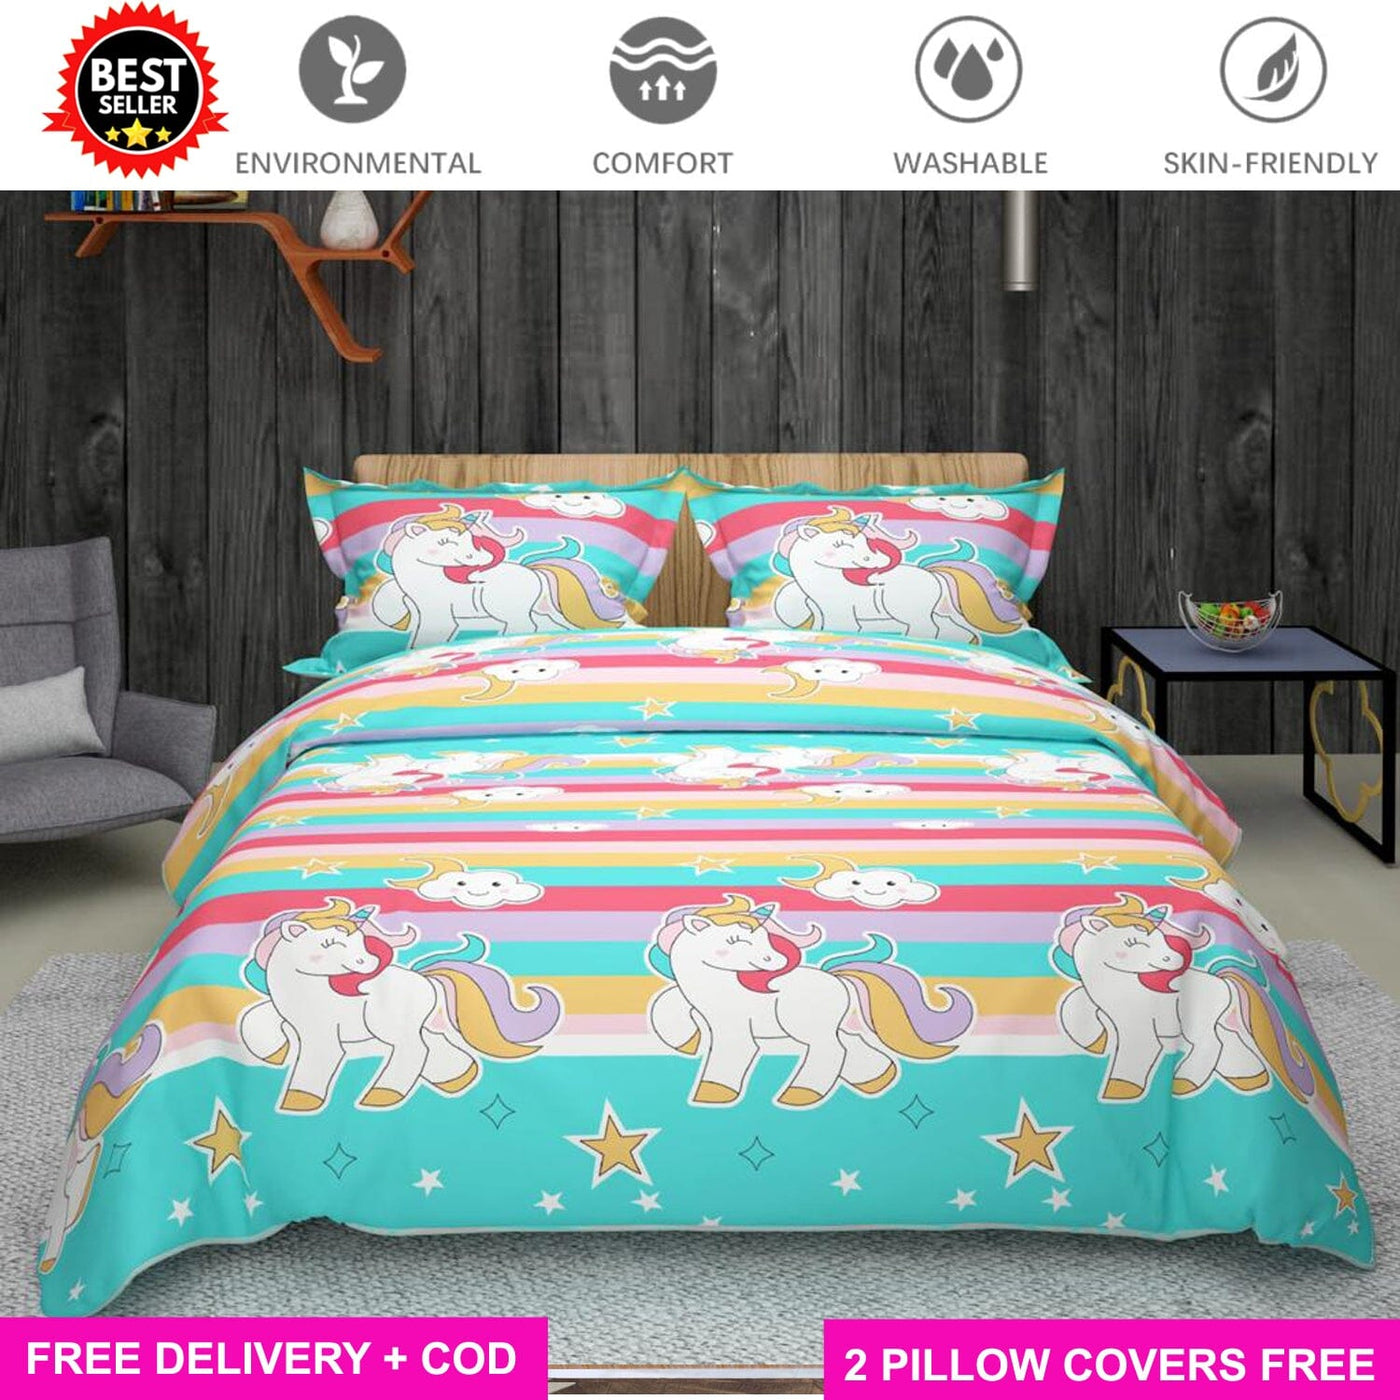 Unicorn Full Elastic Fitted Bedsheet with 2 Pillow Covers - King Size Bed Sheets Great Happy IN 